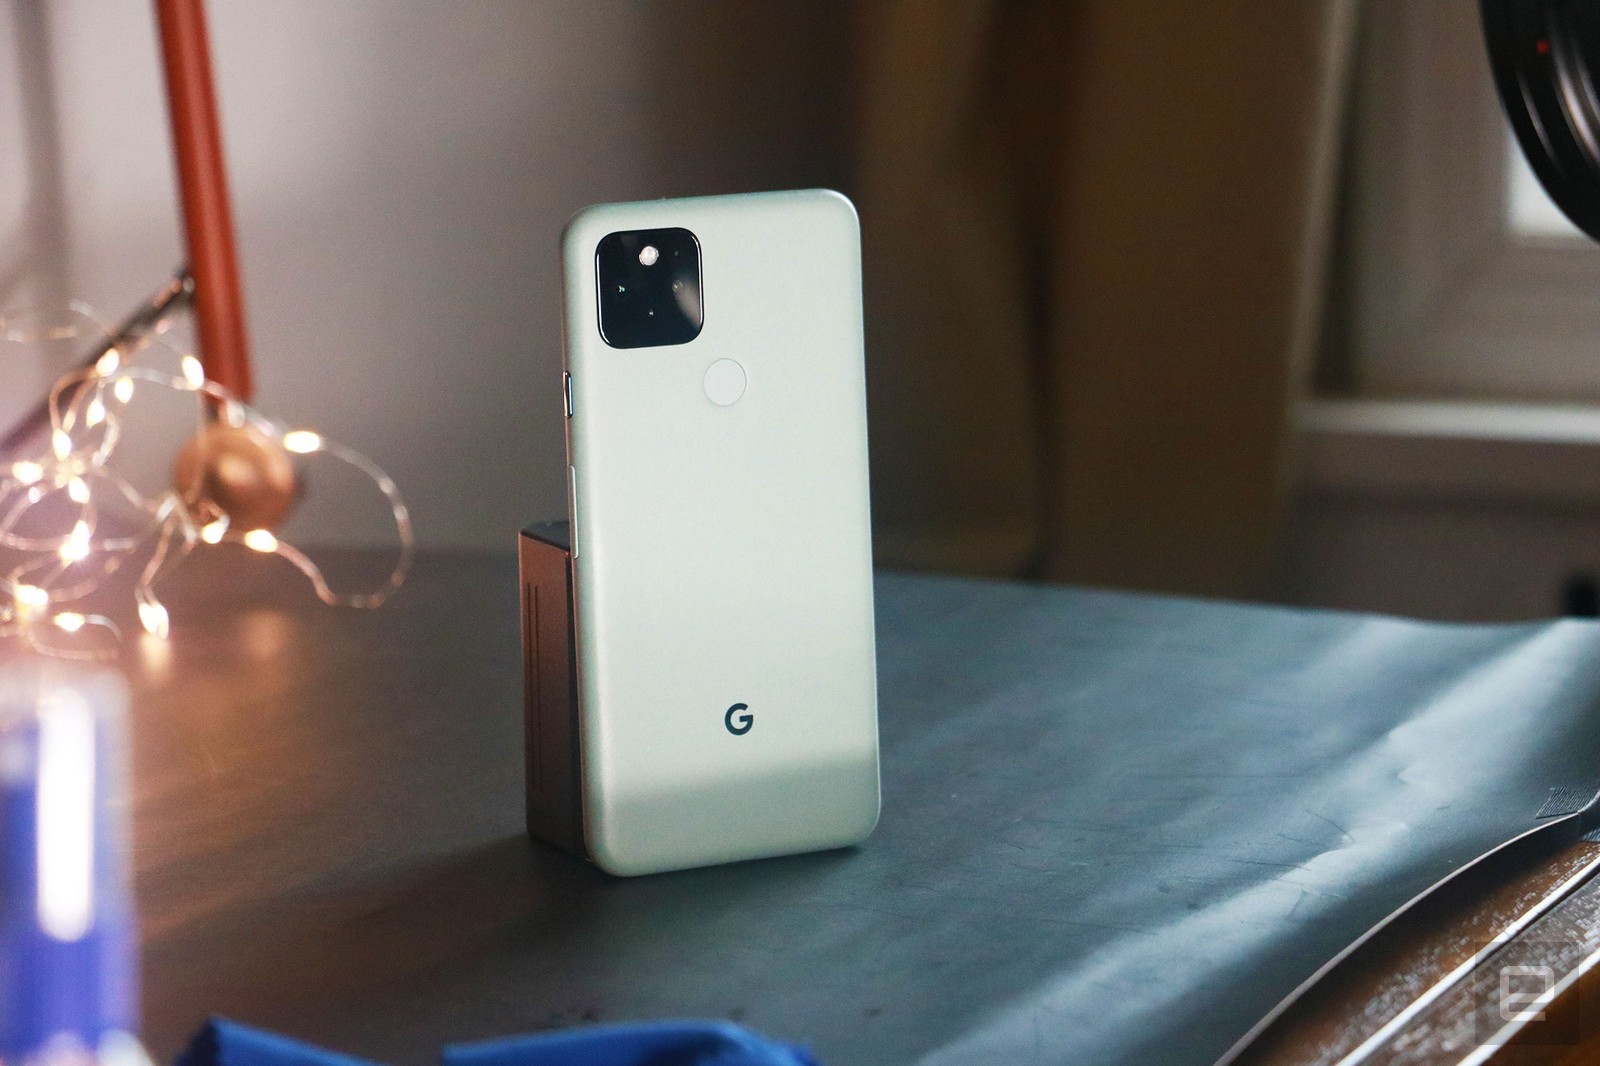 Google would possibly perhaps perhaps likely unveil the Pixel 5a on August 17th